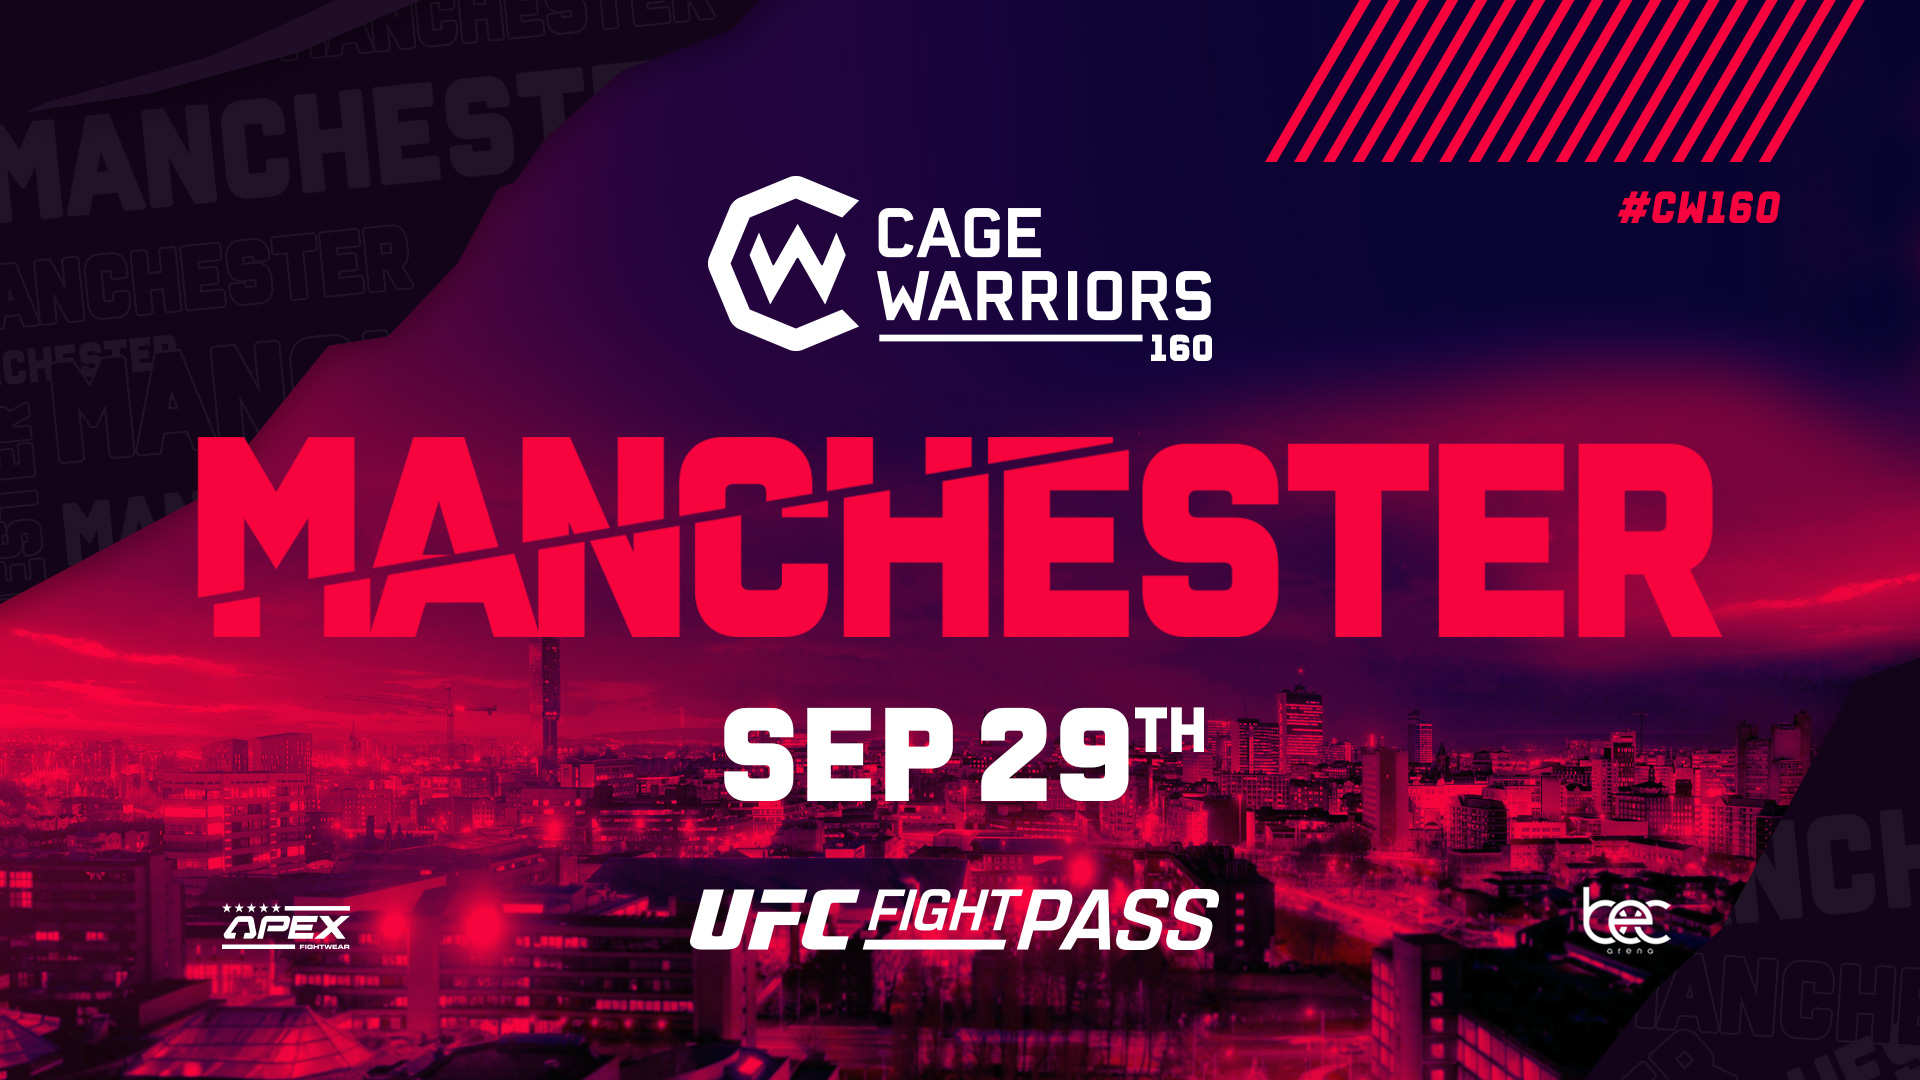 Cage Warriors 160 - Manchester